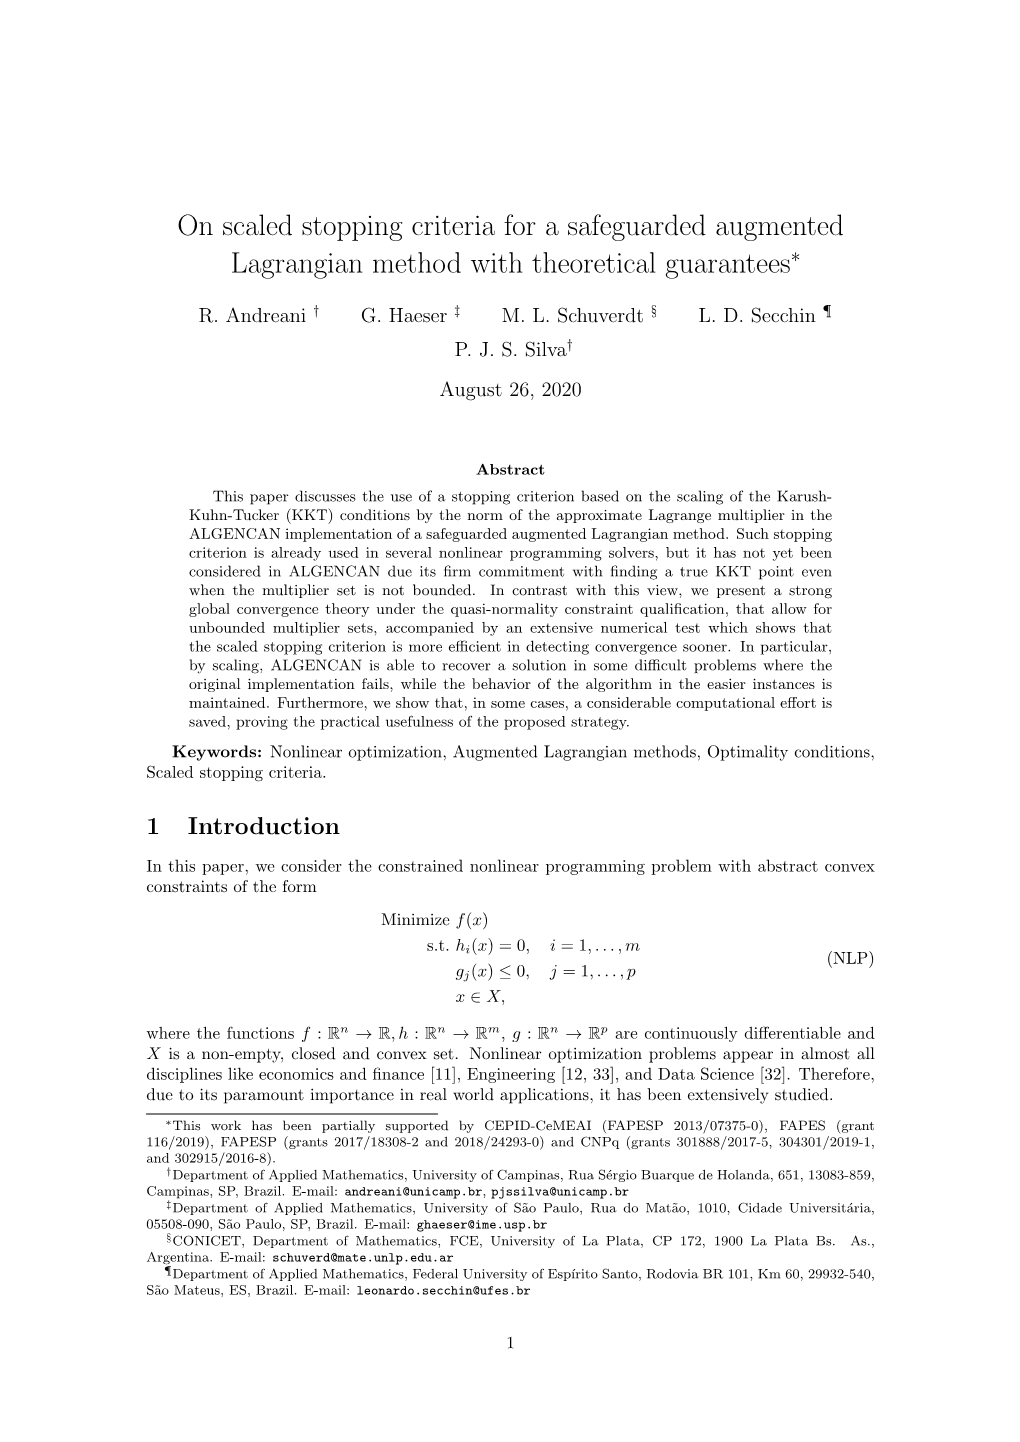 On Scaled Stopping Criteria for a Safeguarded Augmented Lagrangian Method with Theoretical Guarantees∗